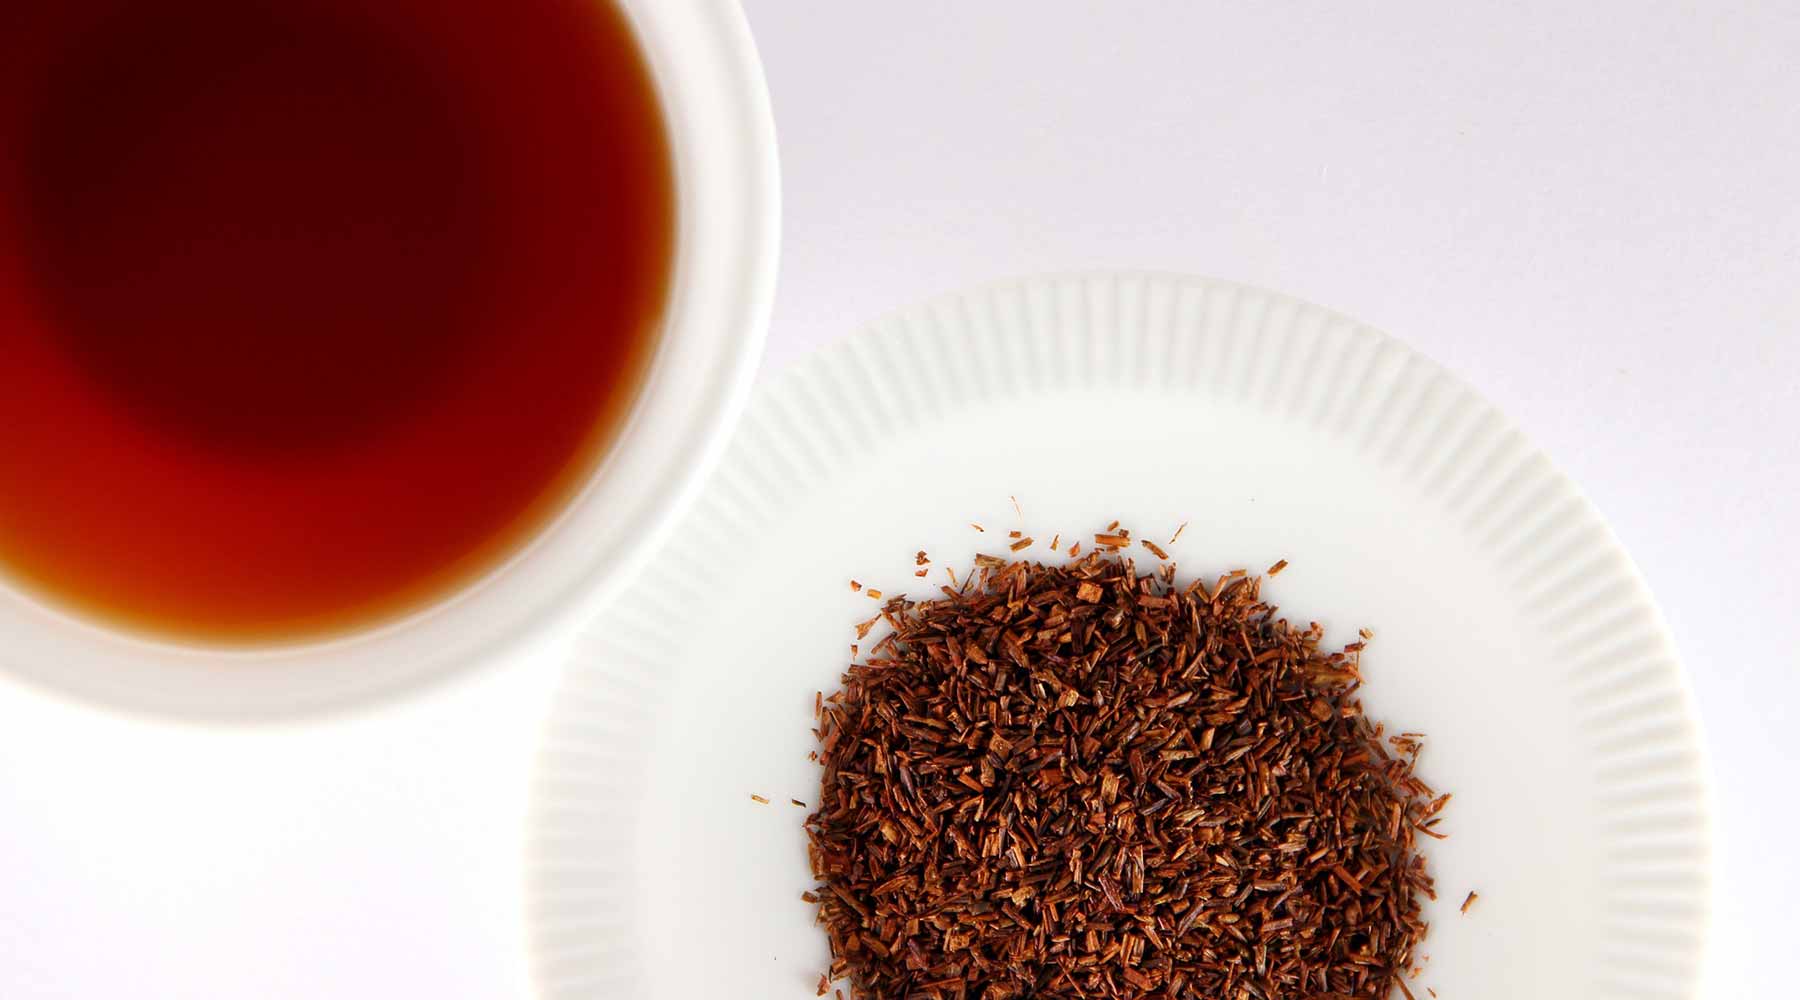 A white cup containing freshly made rooibos tea with a dish of whole rooibos loose tea.